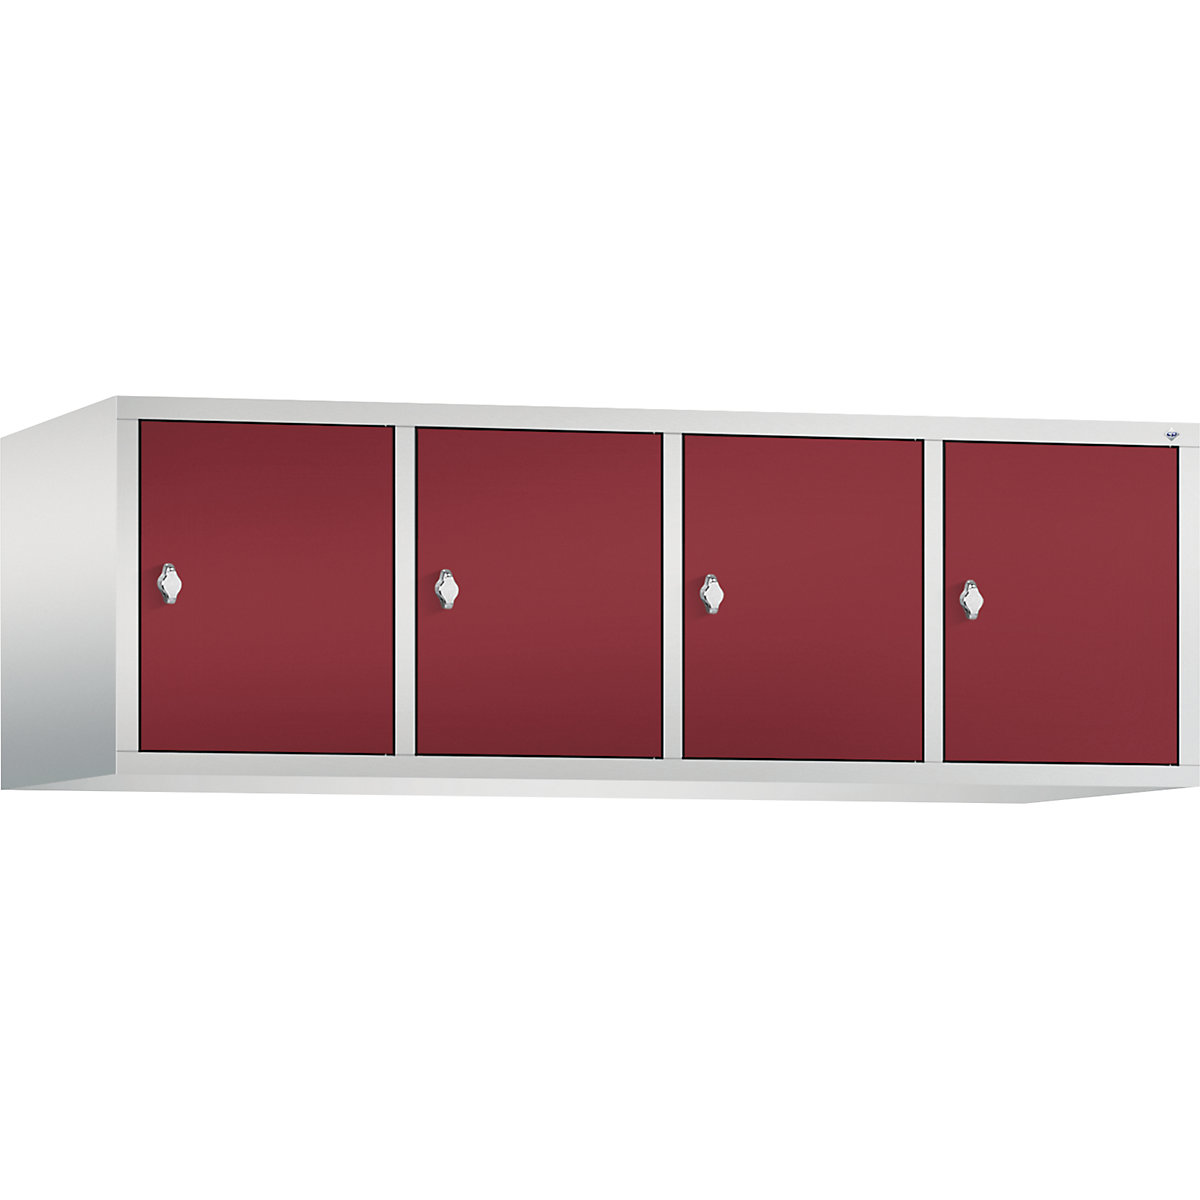 CLASSIC add-on cupboard – C+P, 4 compartments, compartment width 400 mm, light grey / ruby red-12